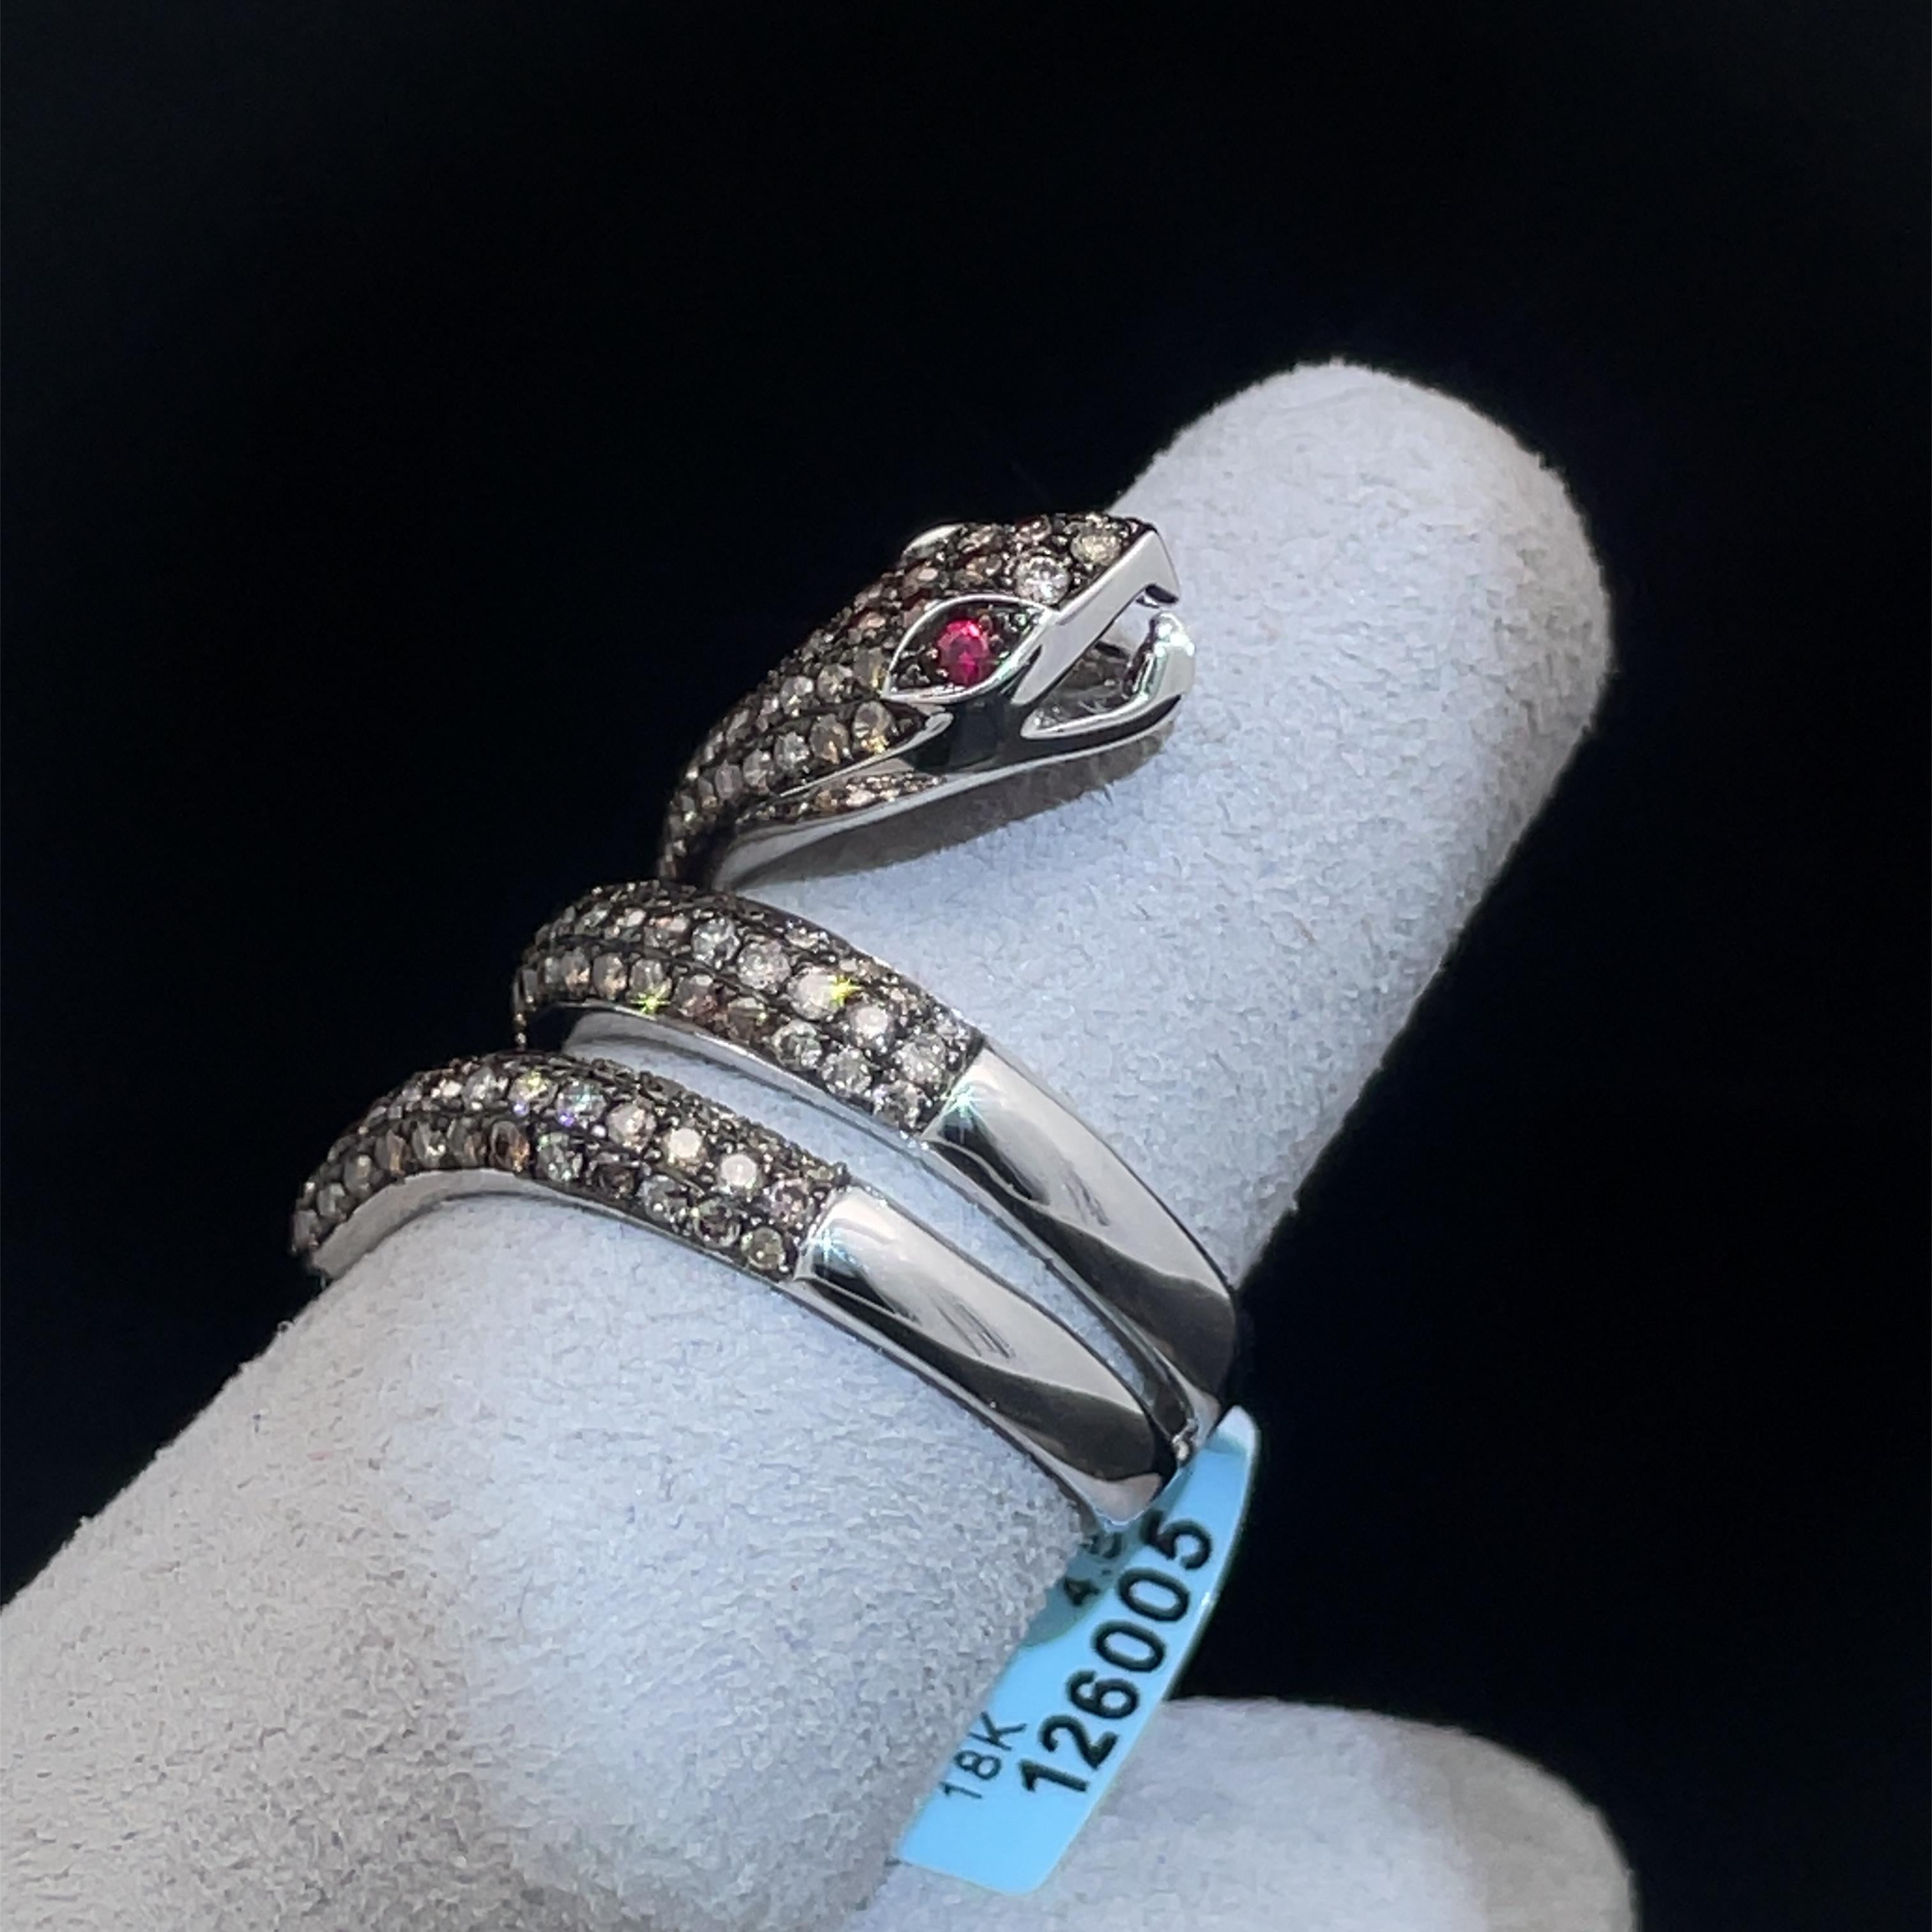 Slither into glamorous style with this brightly polished 18k white gold coiled snake serpent ring. Sparkling round brilliant cut fancy brown diamonds pave set on the ring with natural ruby eyes turn up the luxury to this enchanting and magical